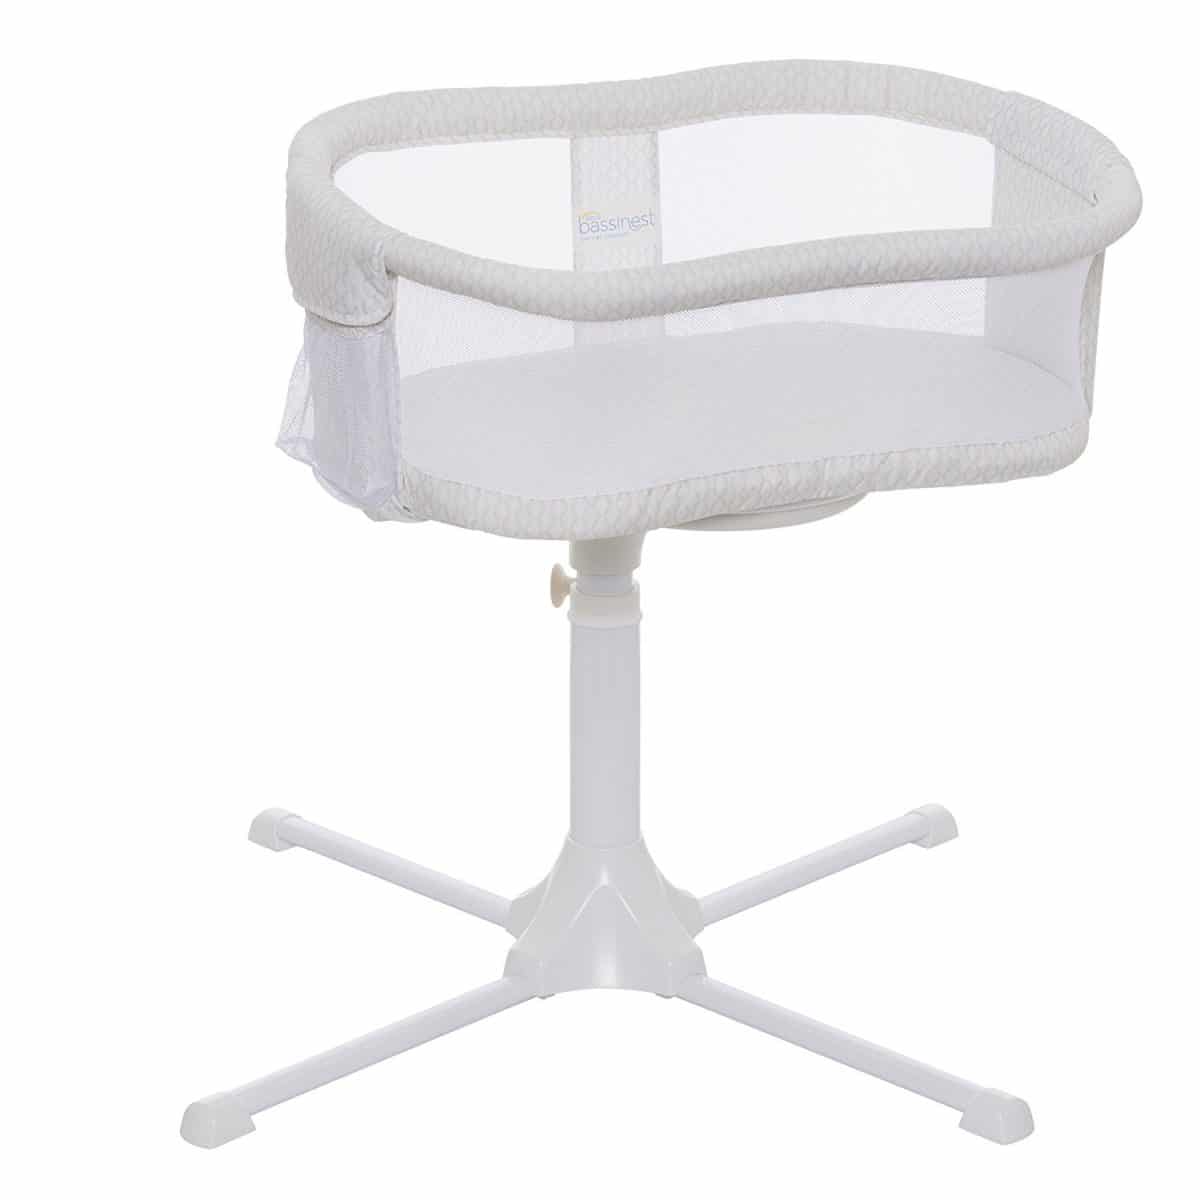 top rated bassinet 2018